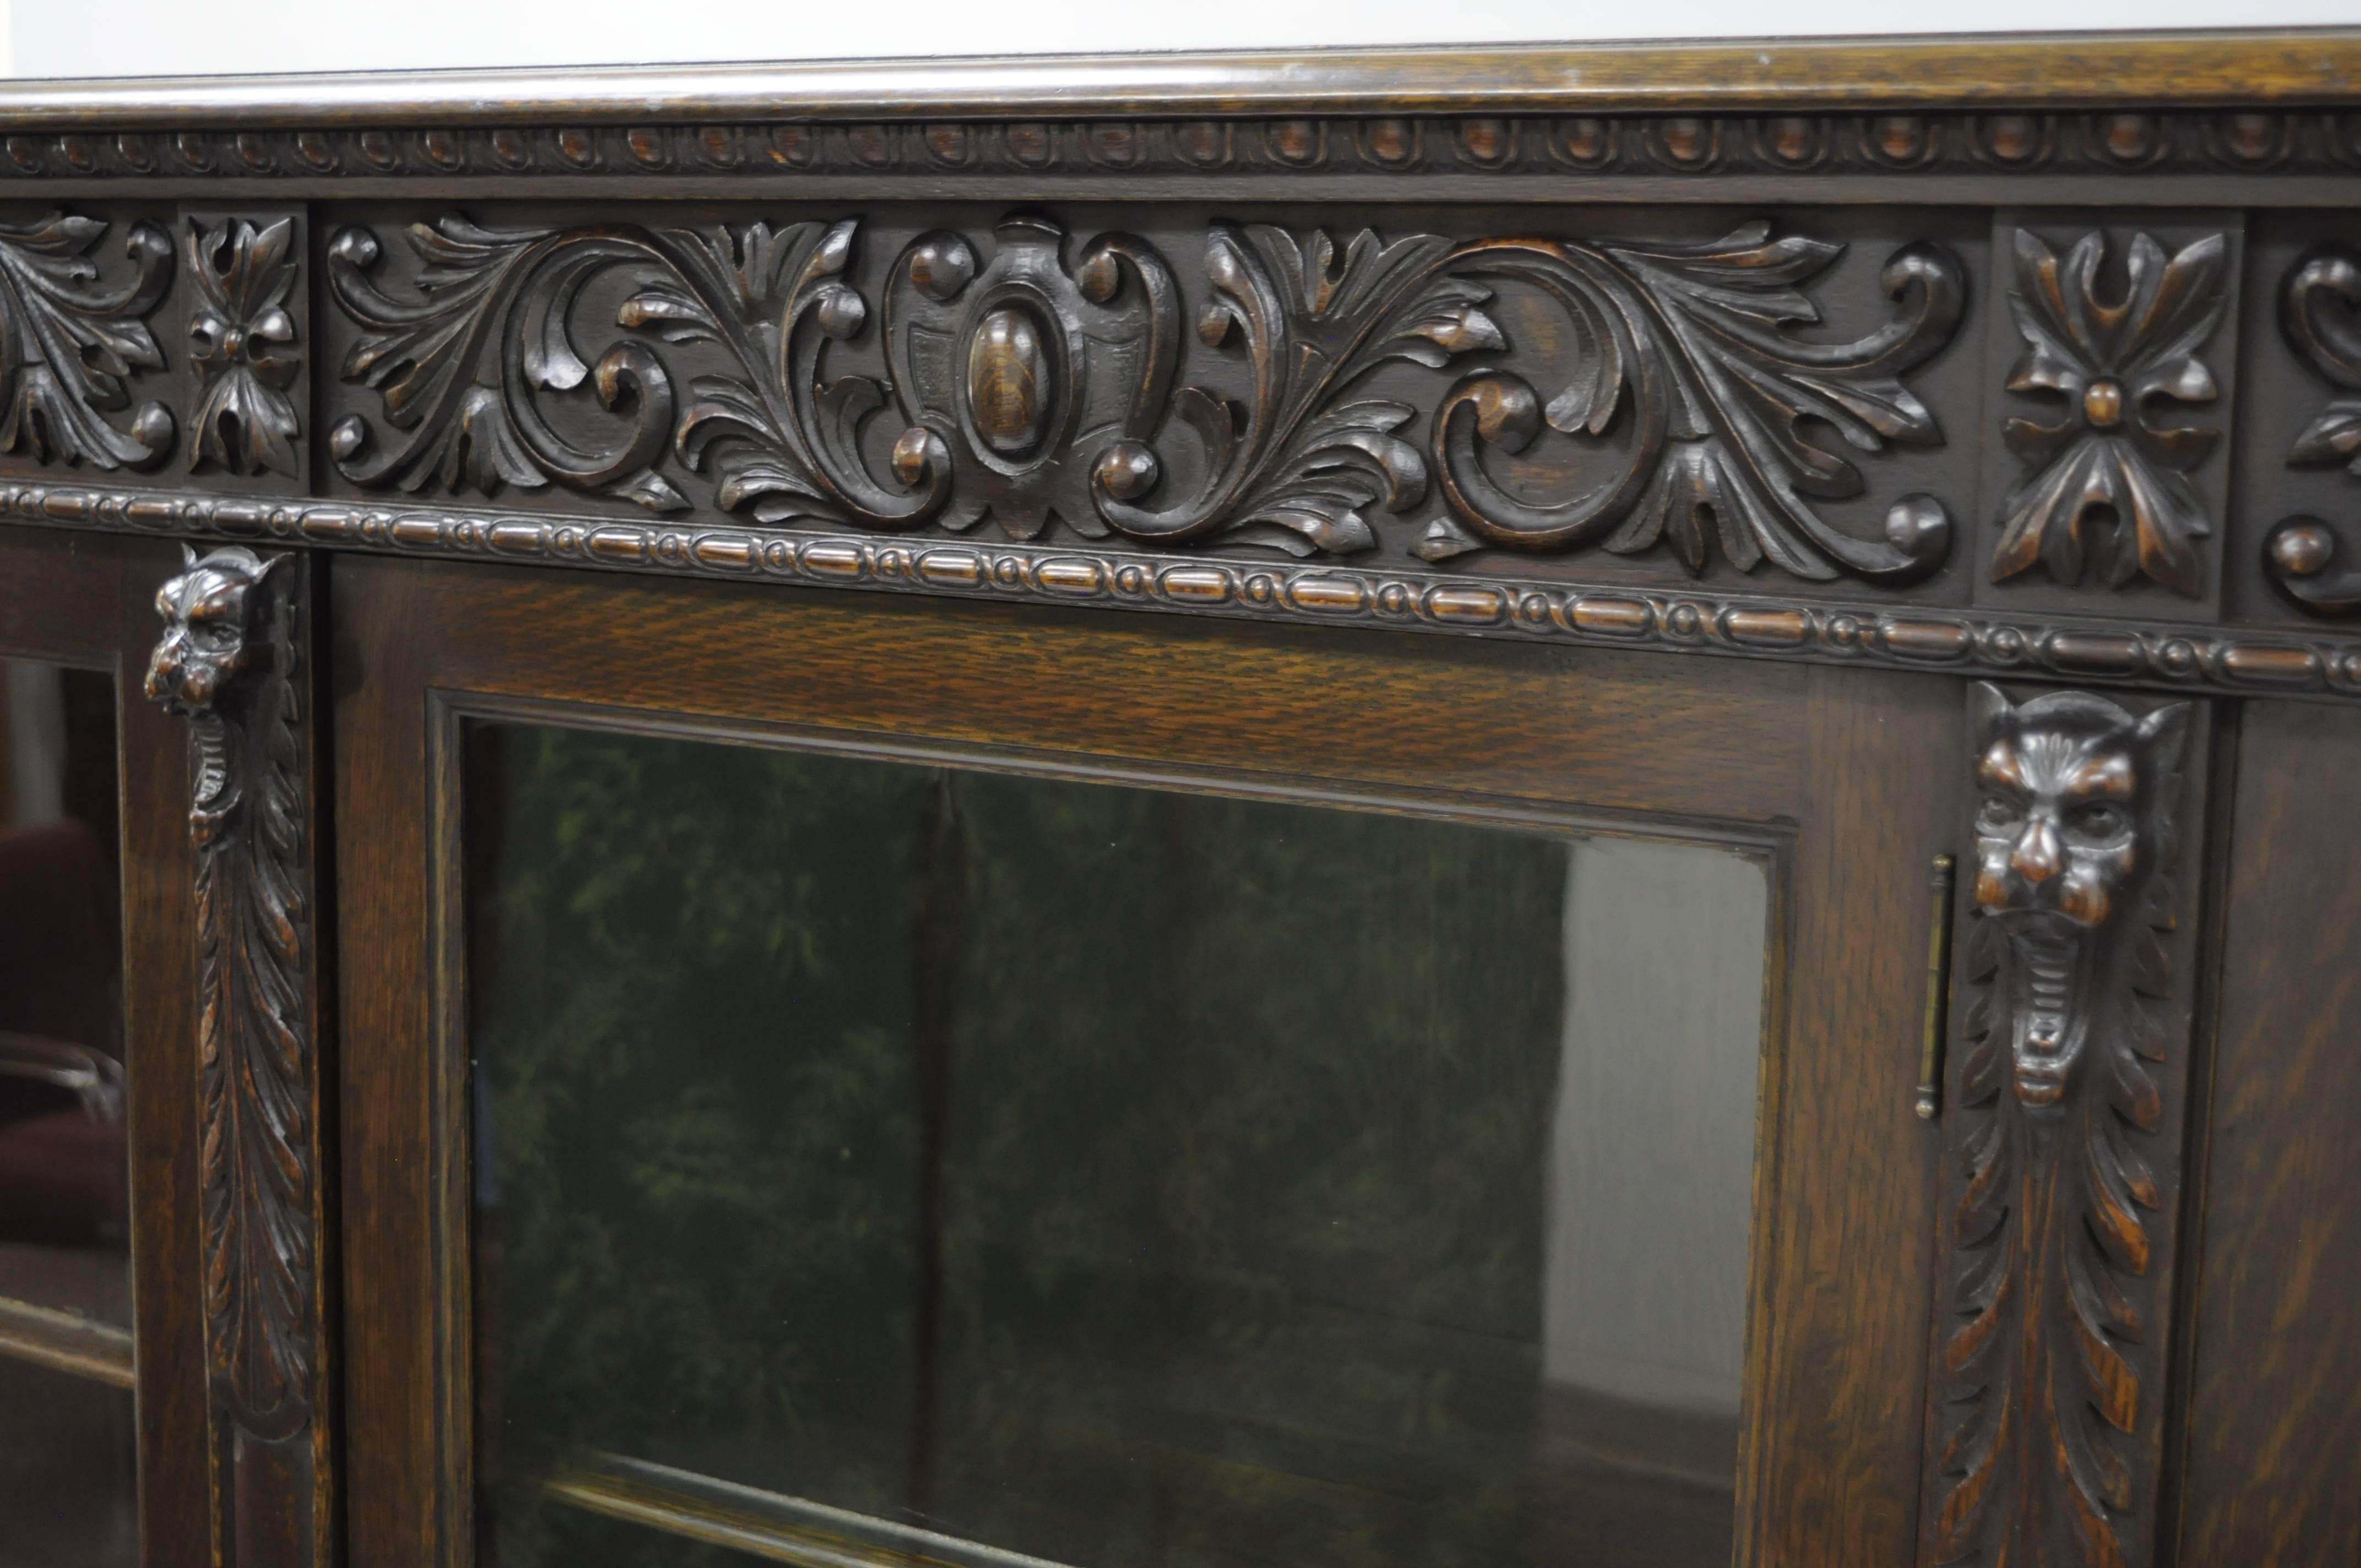 Exceptional antique Victorian oak three-door large triple bookcase with carved figural Gargoyle faces and paw feet. Bookcase features floral foliate and shield carvings across the top border, four open mouth gargoyle faces, four paw feet across the